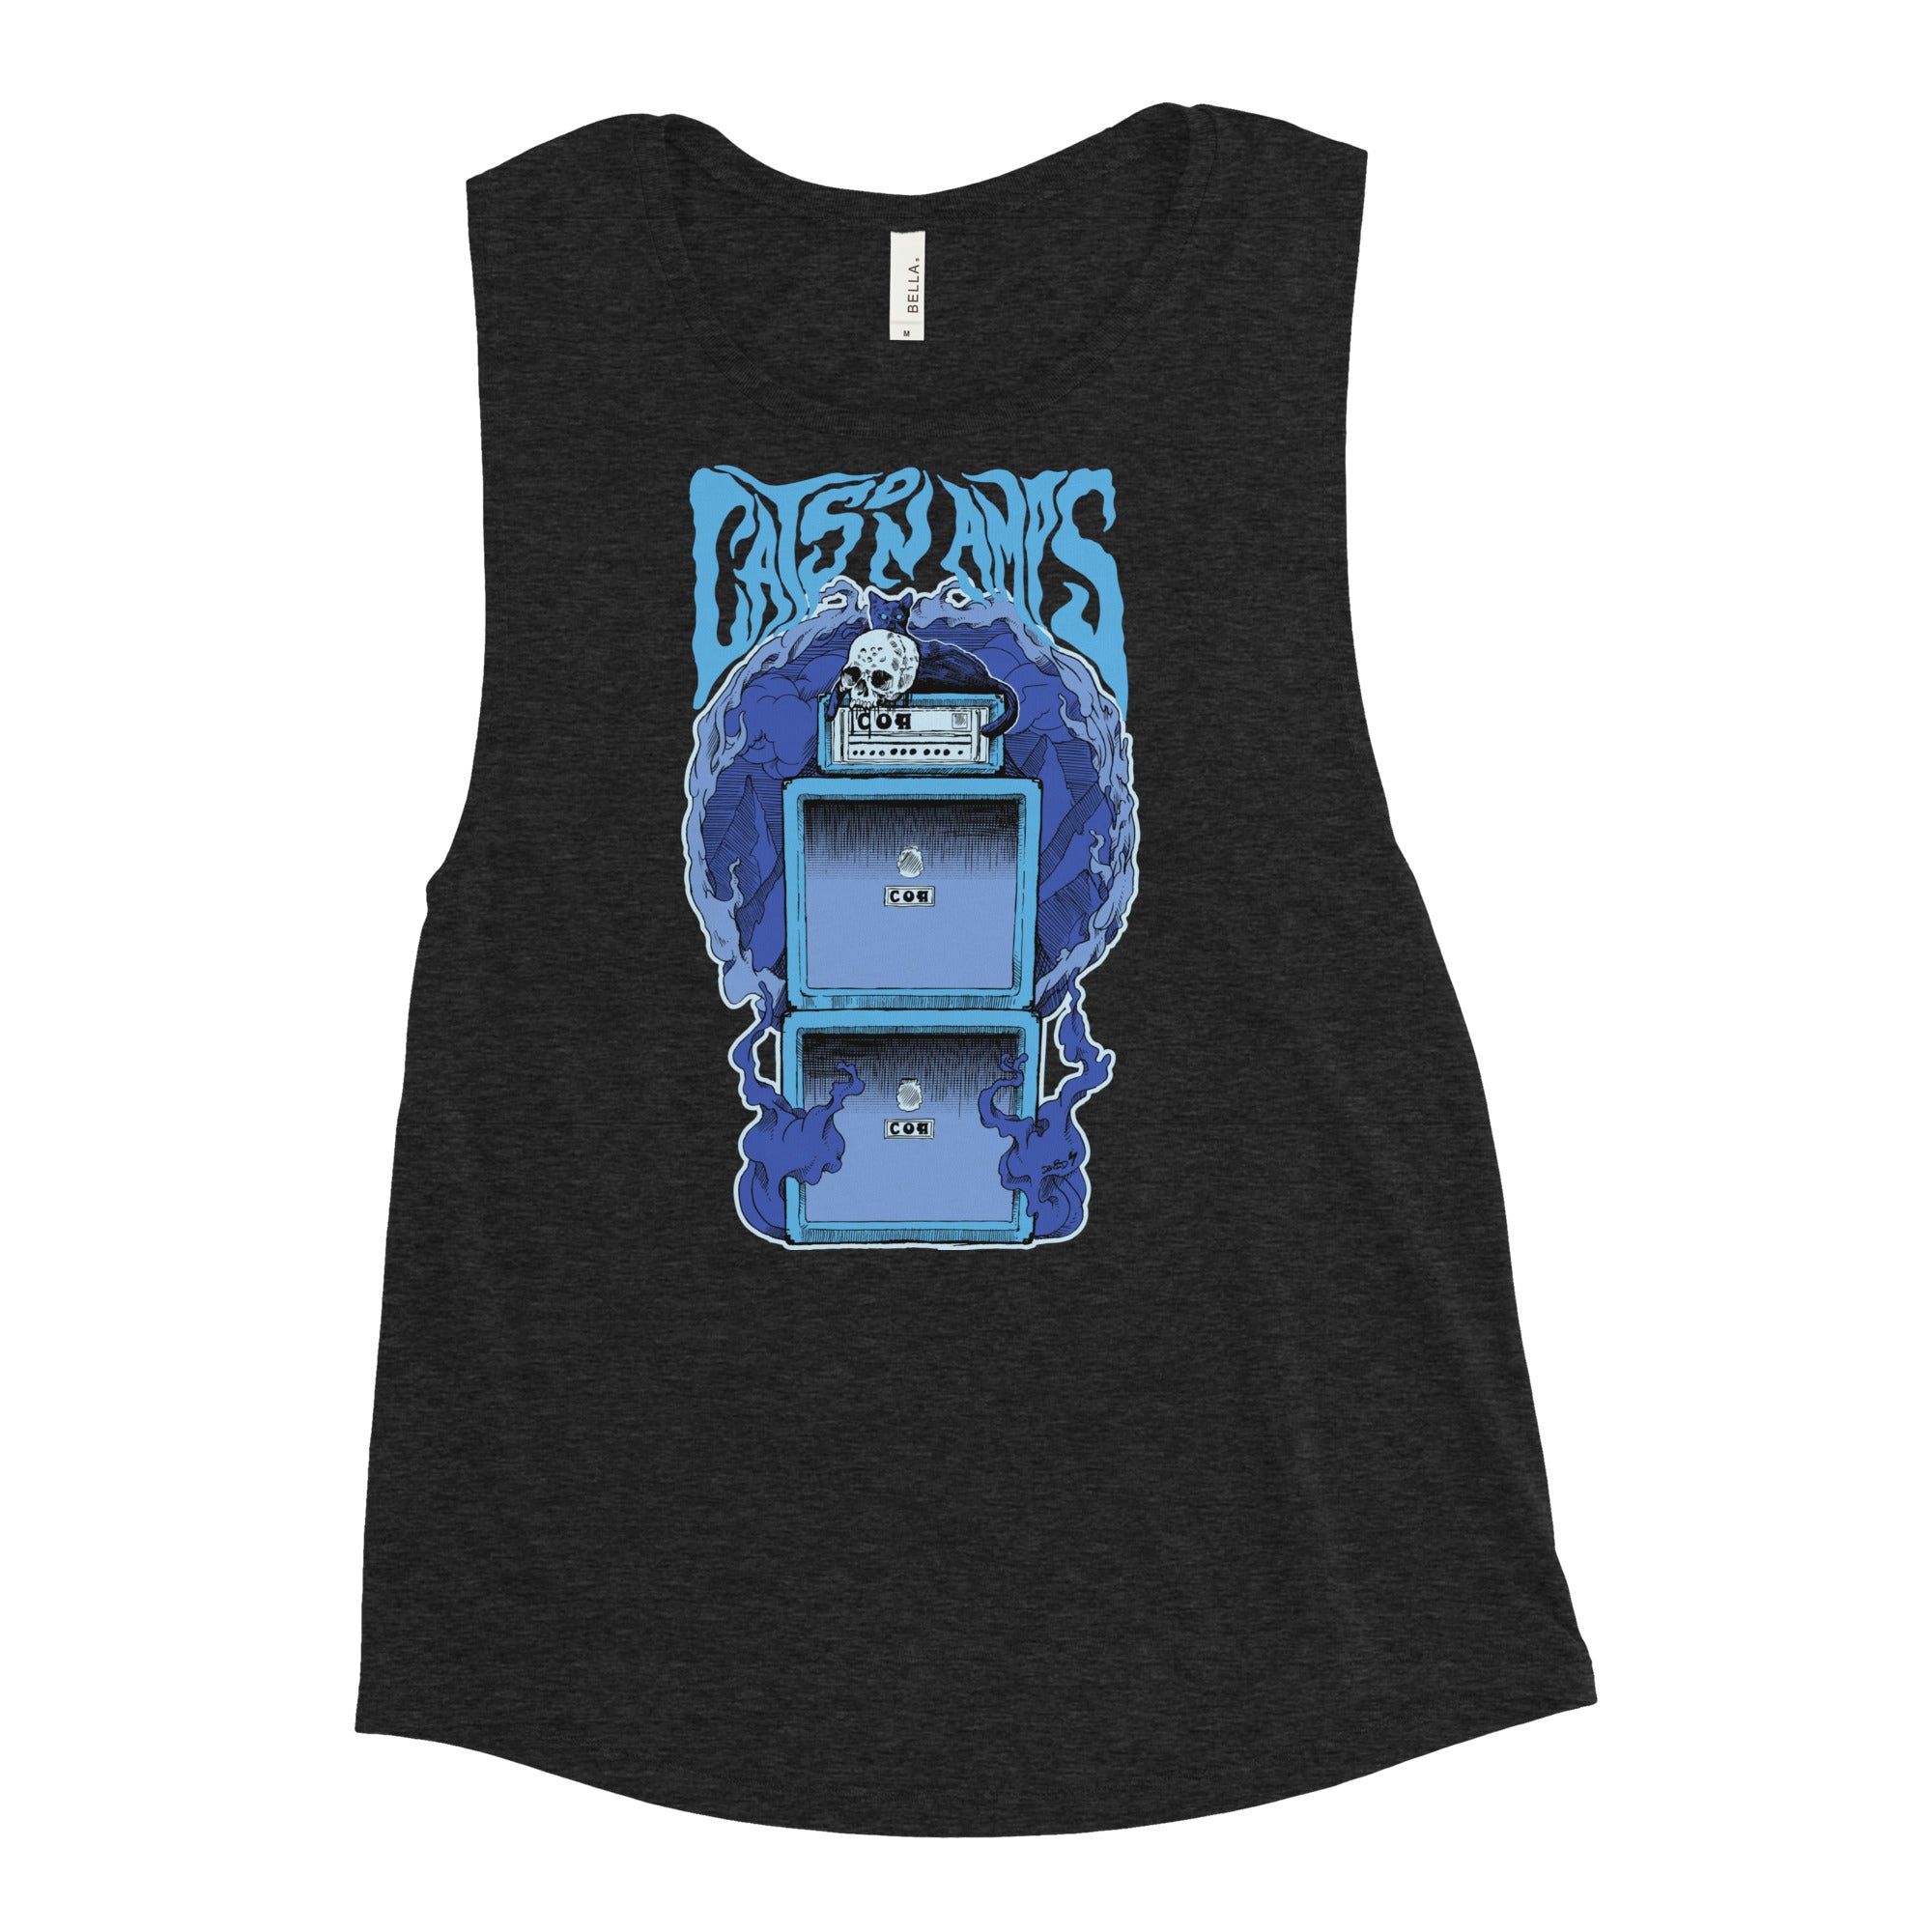 CATS ON AMPS - Midnight - Ladies’ Muscle Tank